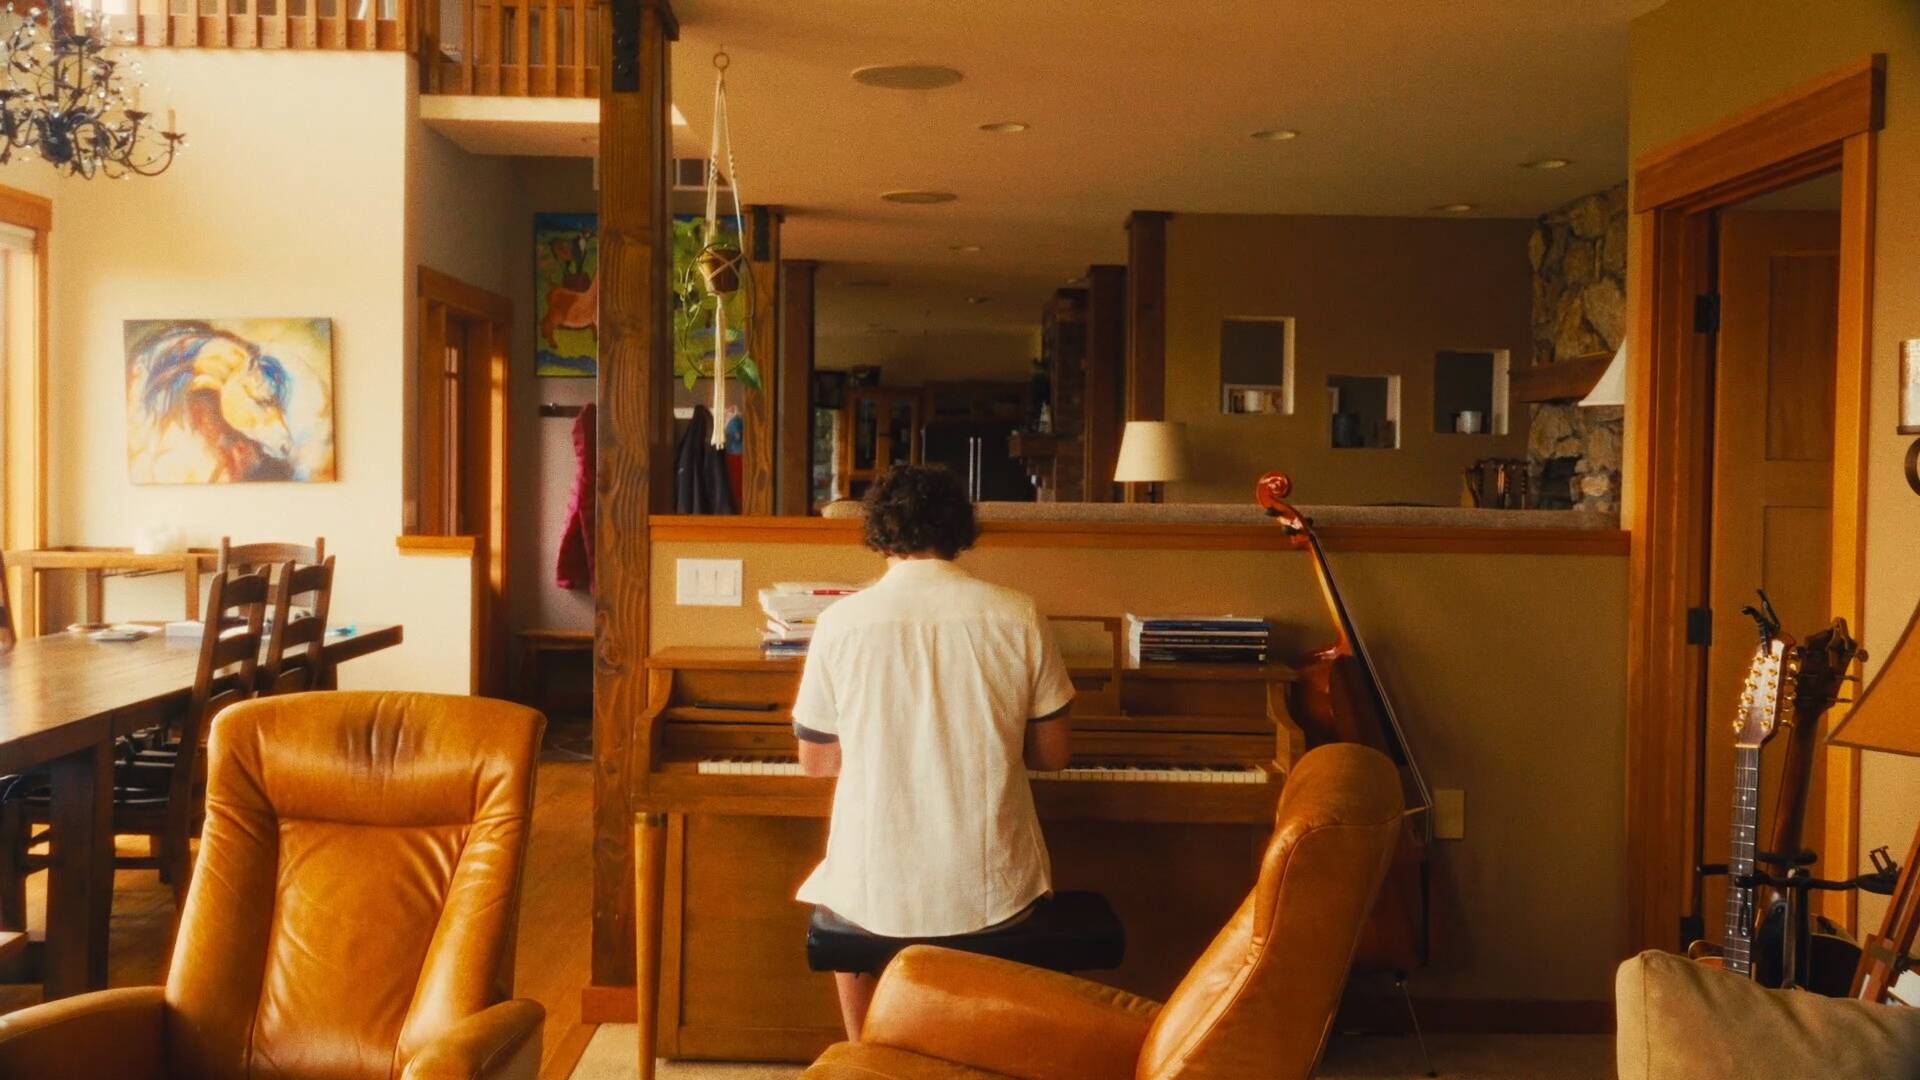 Photo provided
Grant Steller practices piano in his home in Coupeville.